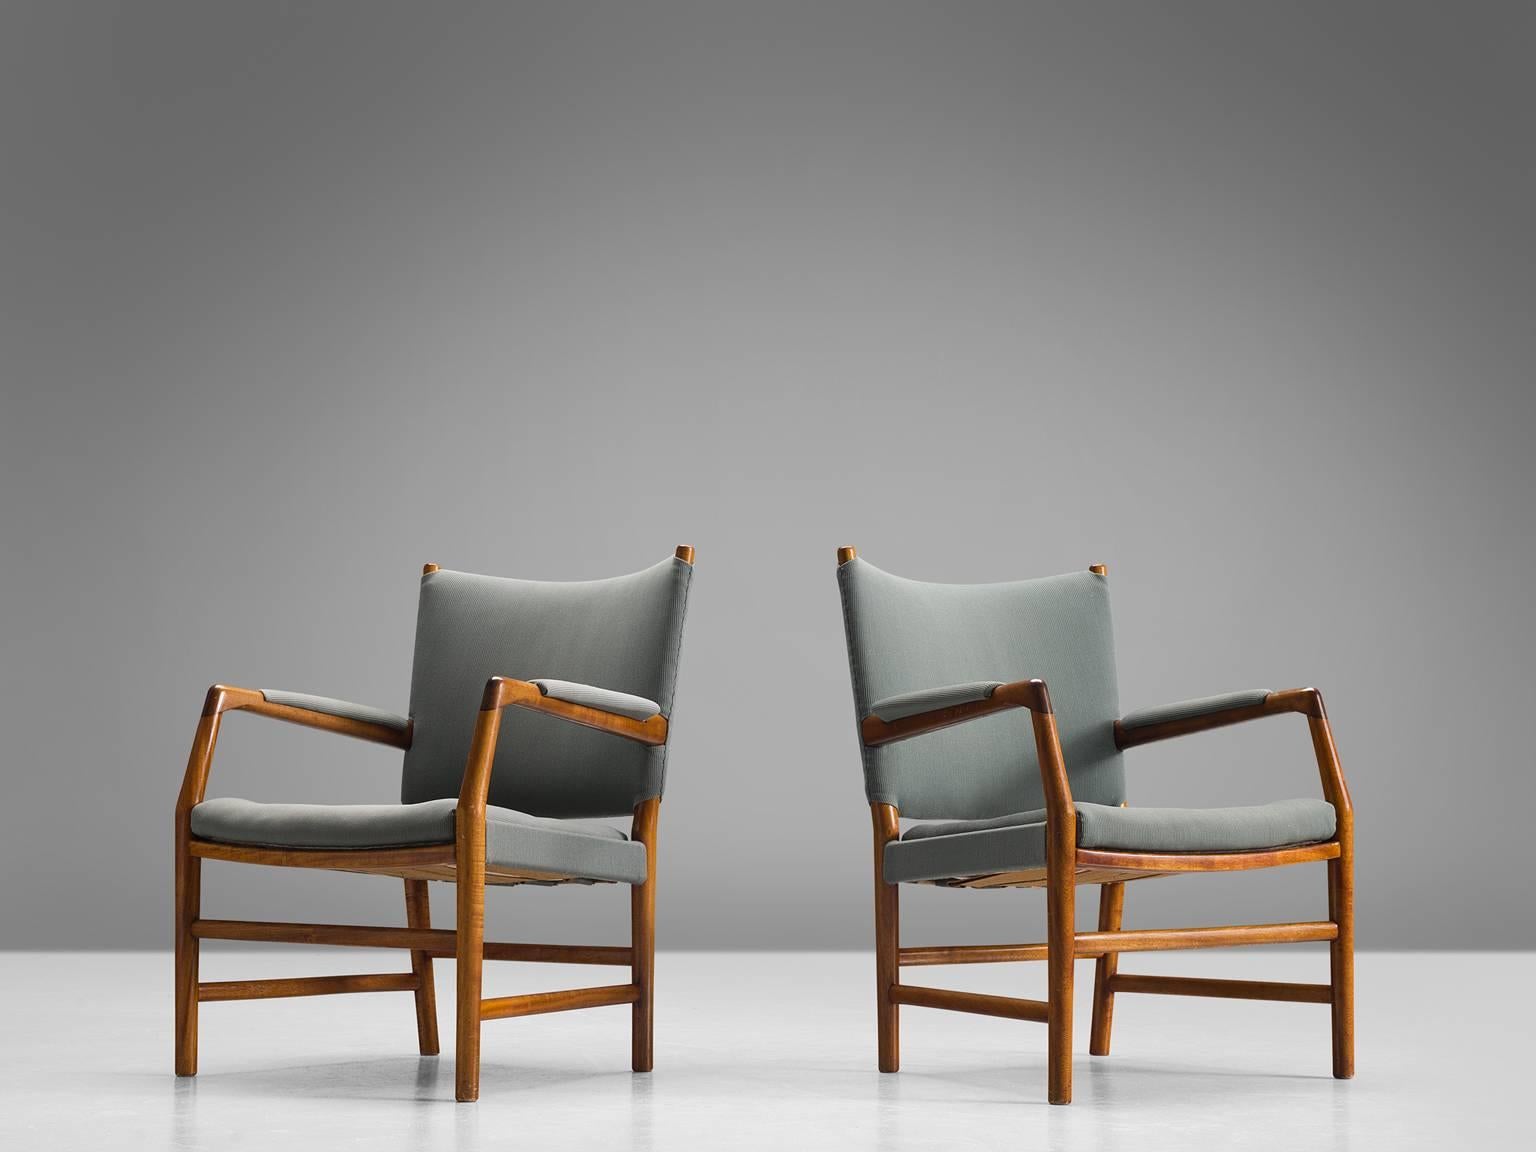 Hans J. Wegner for Plan Møbler, pair of armchairs 'Model B 123', mahogany, green greyish upholstery, Denmark, design 1942

A pair of mahogany armchairs upholstered with a greenish fabric. This model B 123, was designed by Wegner when he worked in